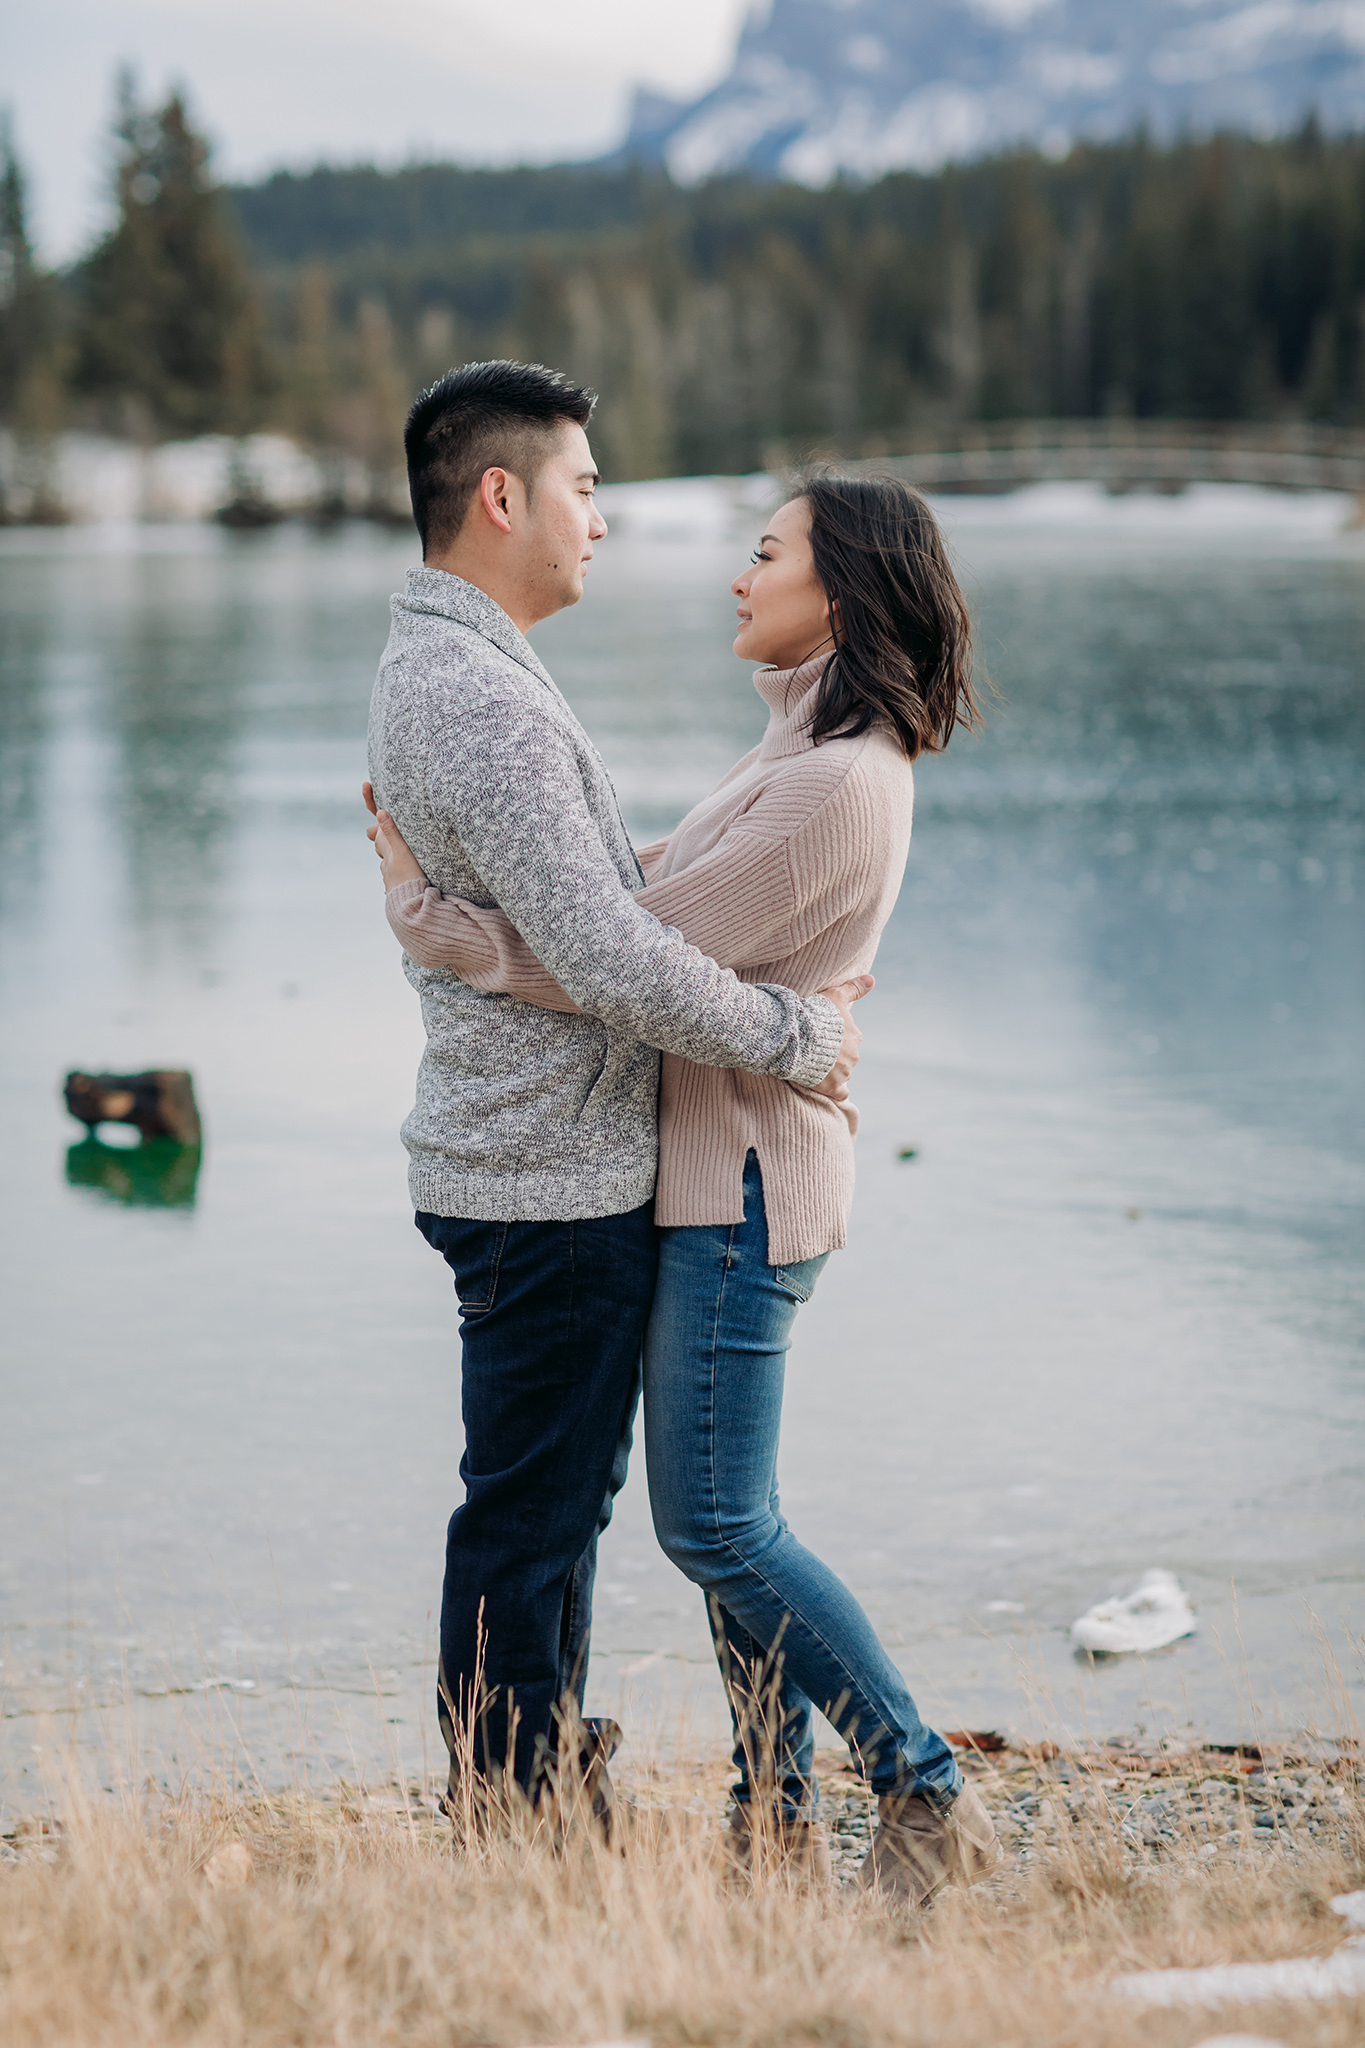 Banff National Park early winter November engagement session on a windy day at Cascade Ponds